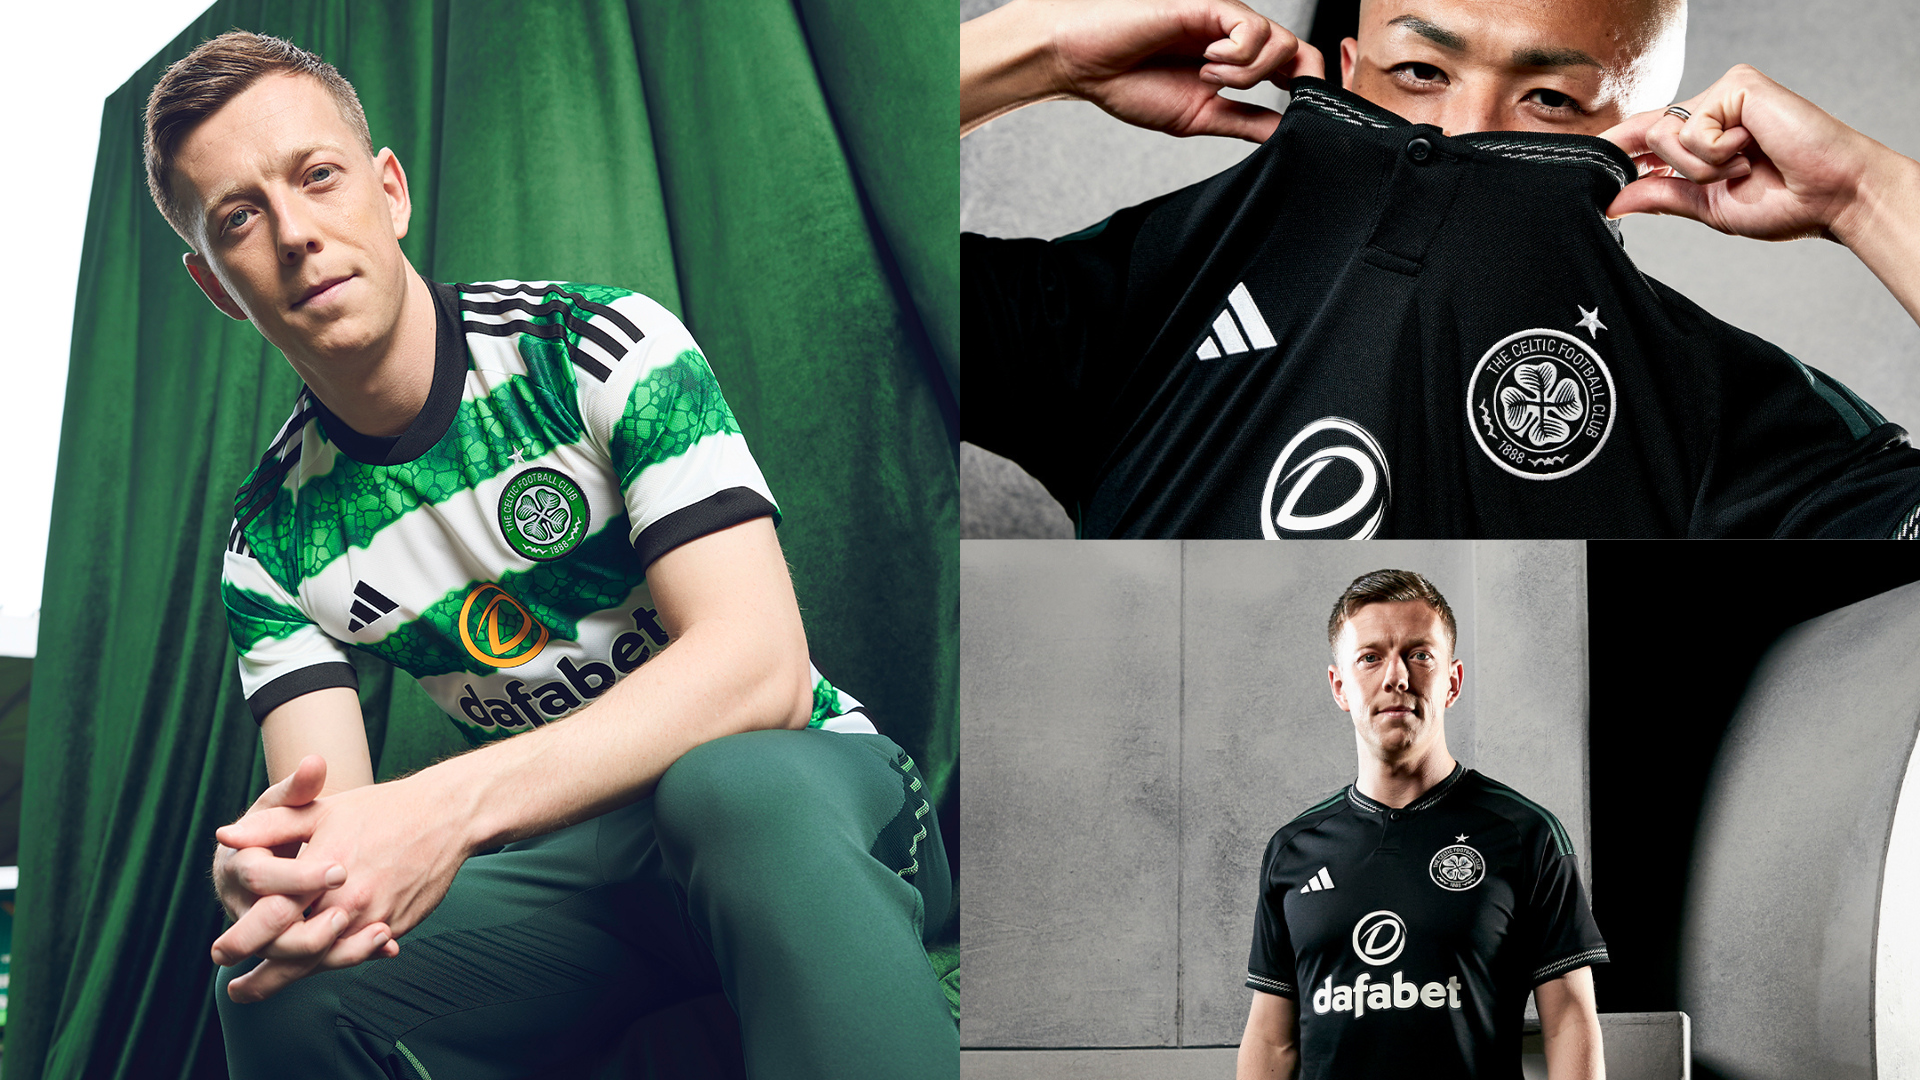 Celtic away kit 2021/22 unveiled as Hoops go for all-green look